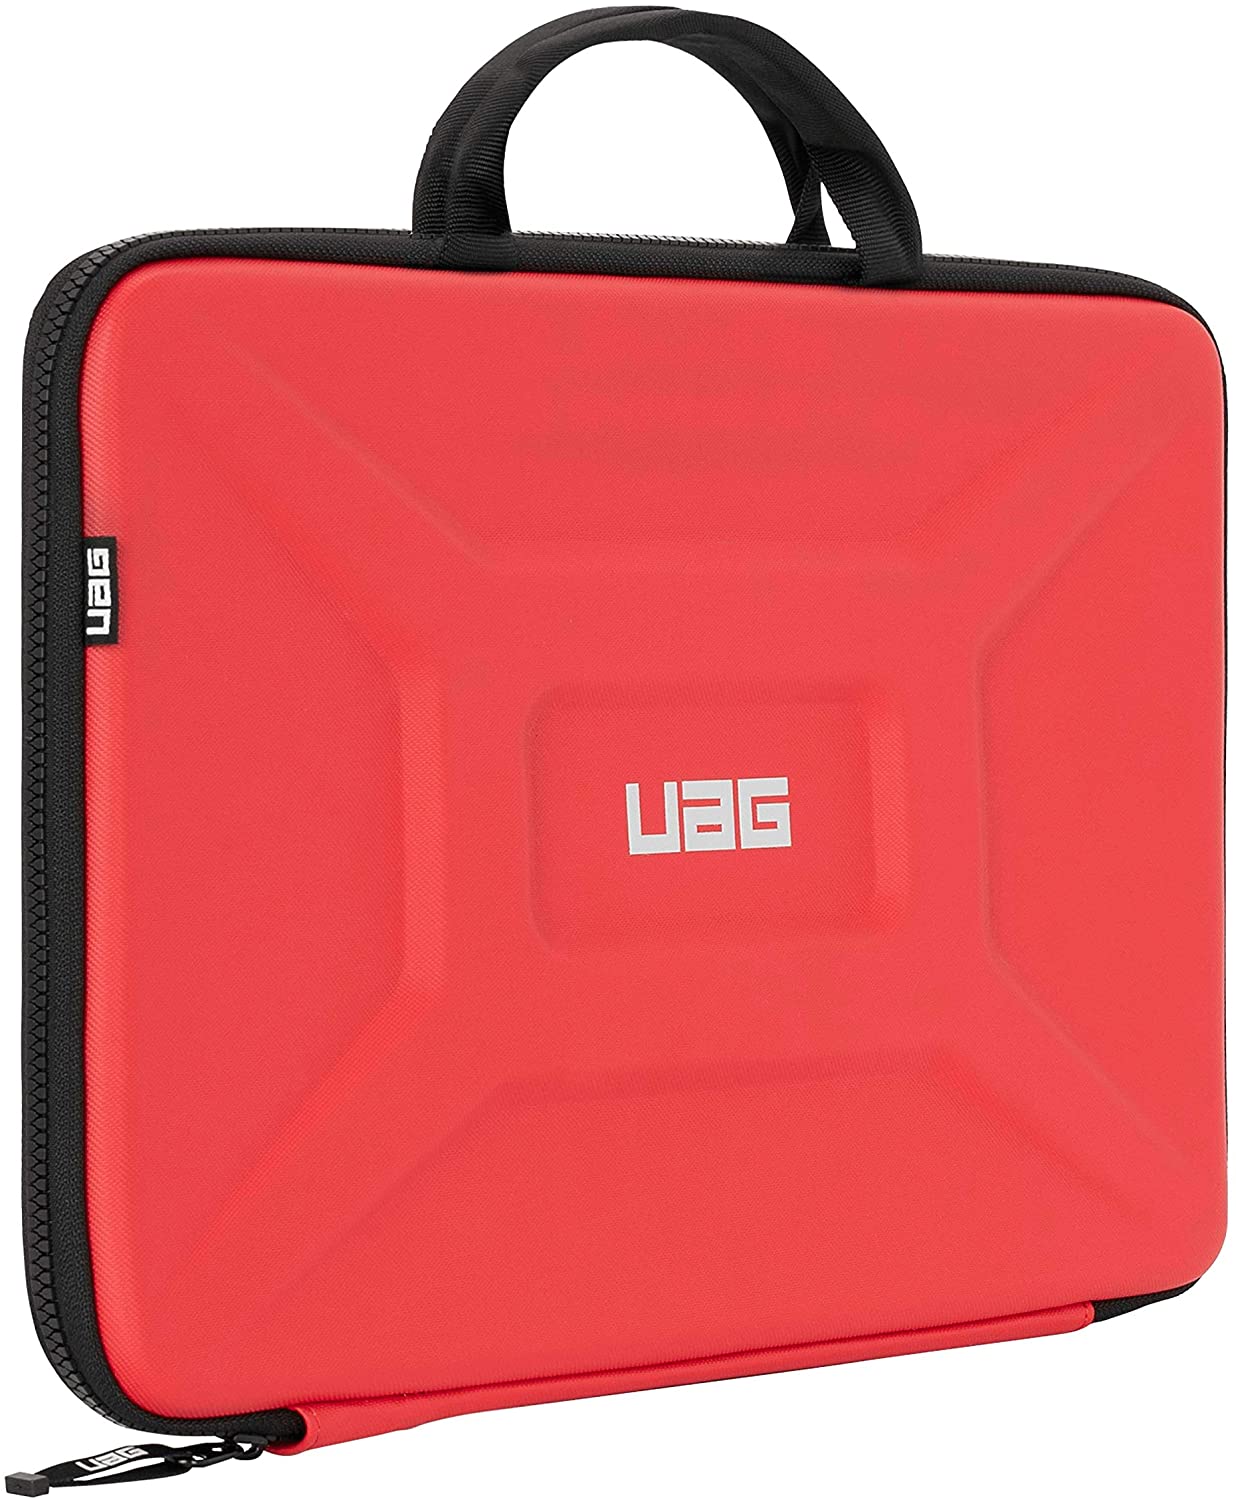 UAG LARGE SLEEVE WITH HANDLE - FITS 15" COMPUTERS